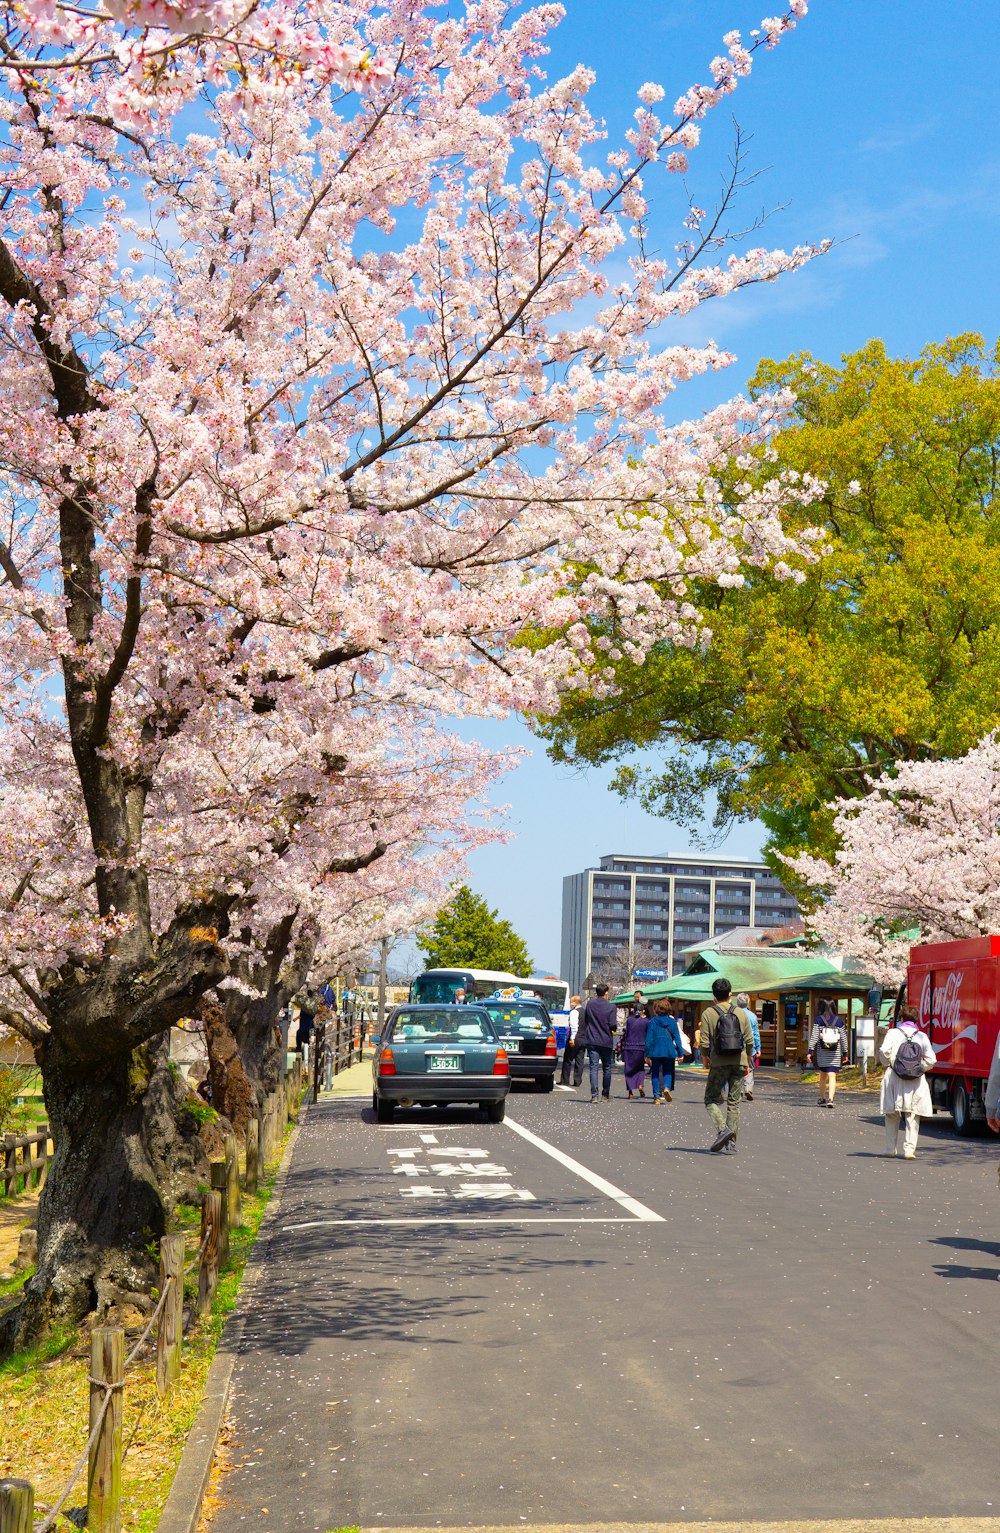 a group of people walking down a street under cherry blossom trees